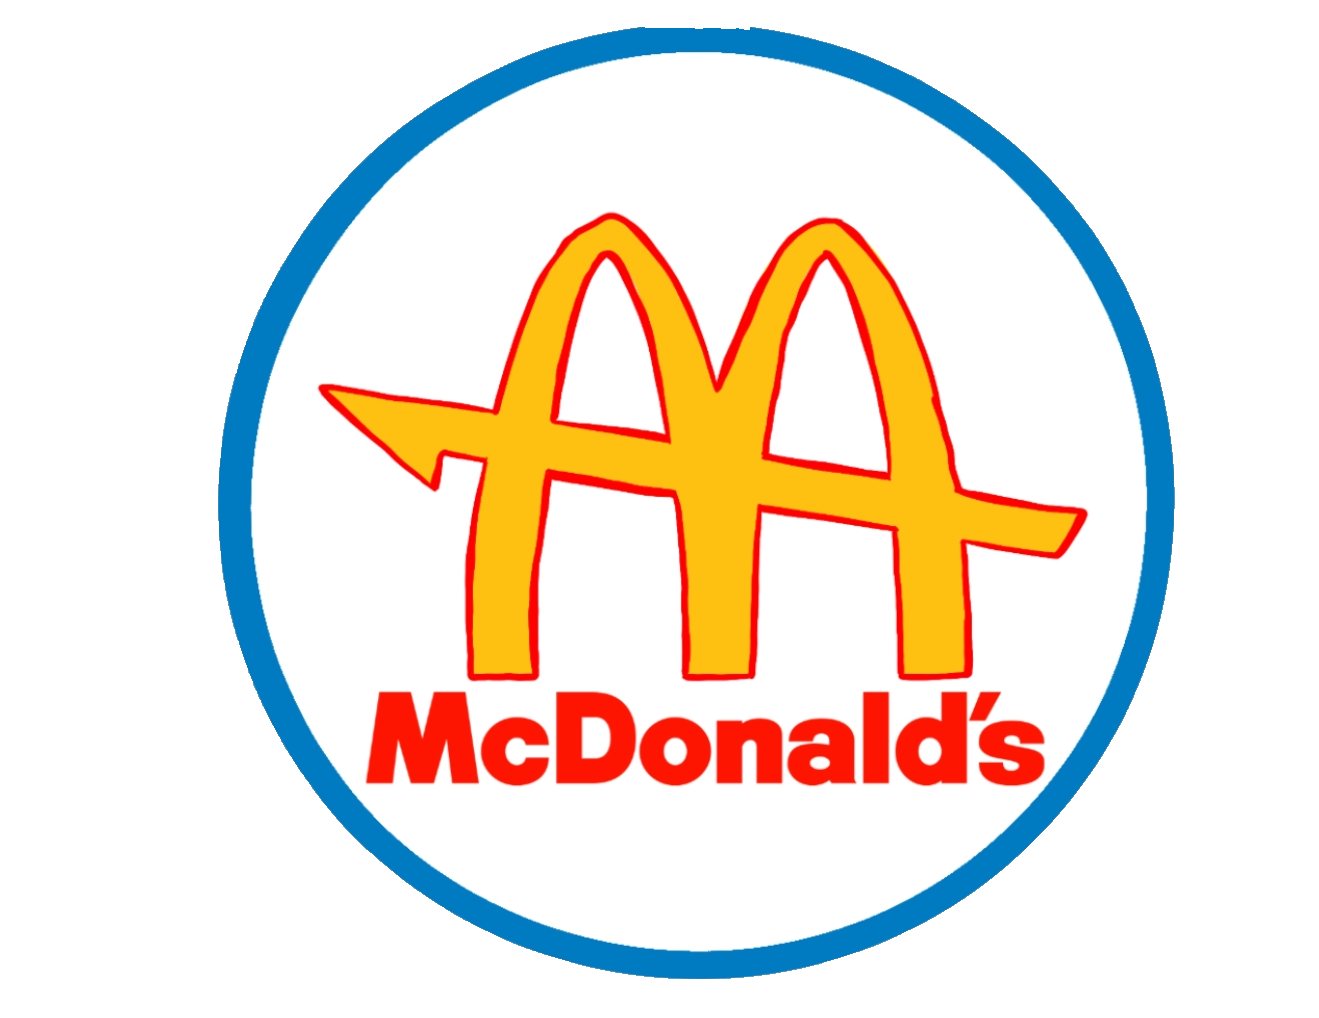 McDonald's Logo in style of the 1961 Logo by 13939483jr on DeviantArt